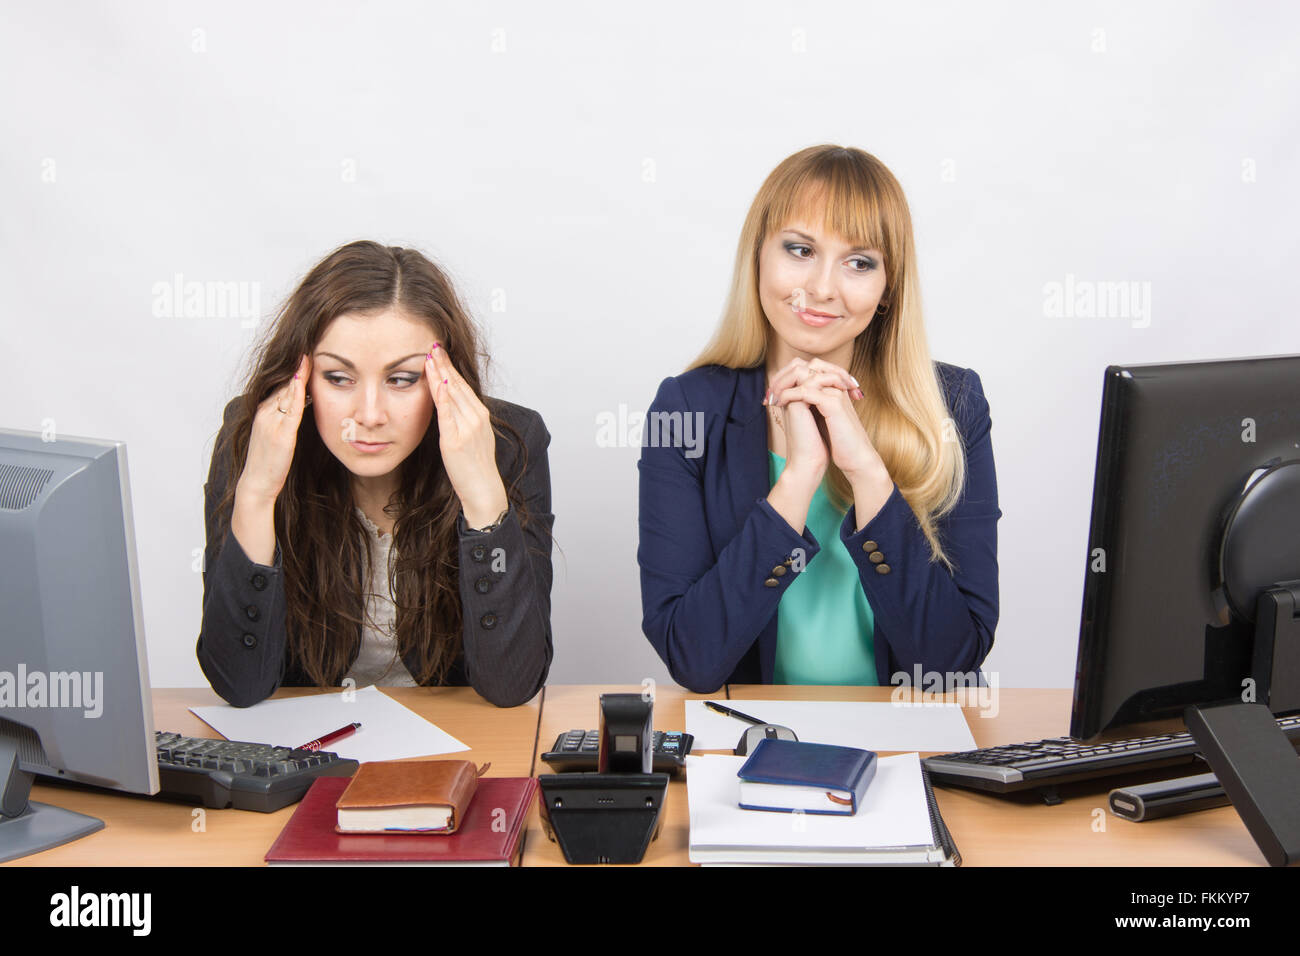 The situation in the office - girl happily looking at a computer screen, the other a girl with a headache looking at the screen Stock Photo